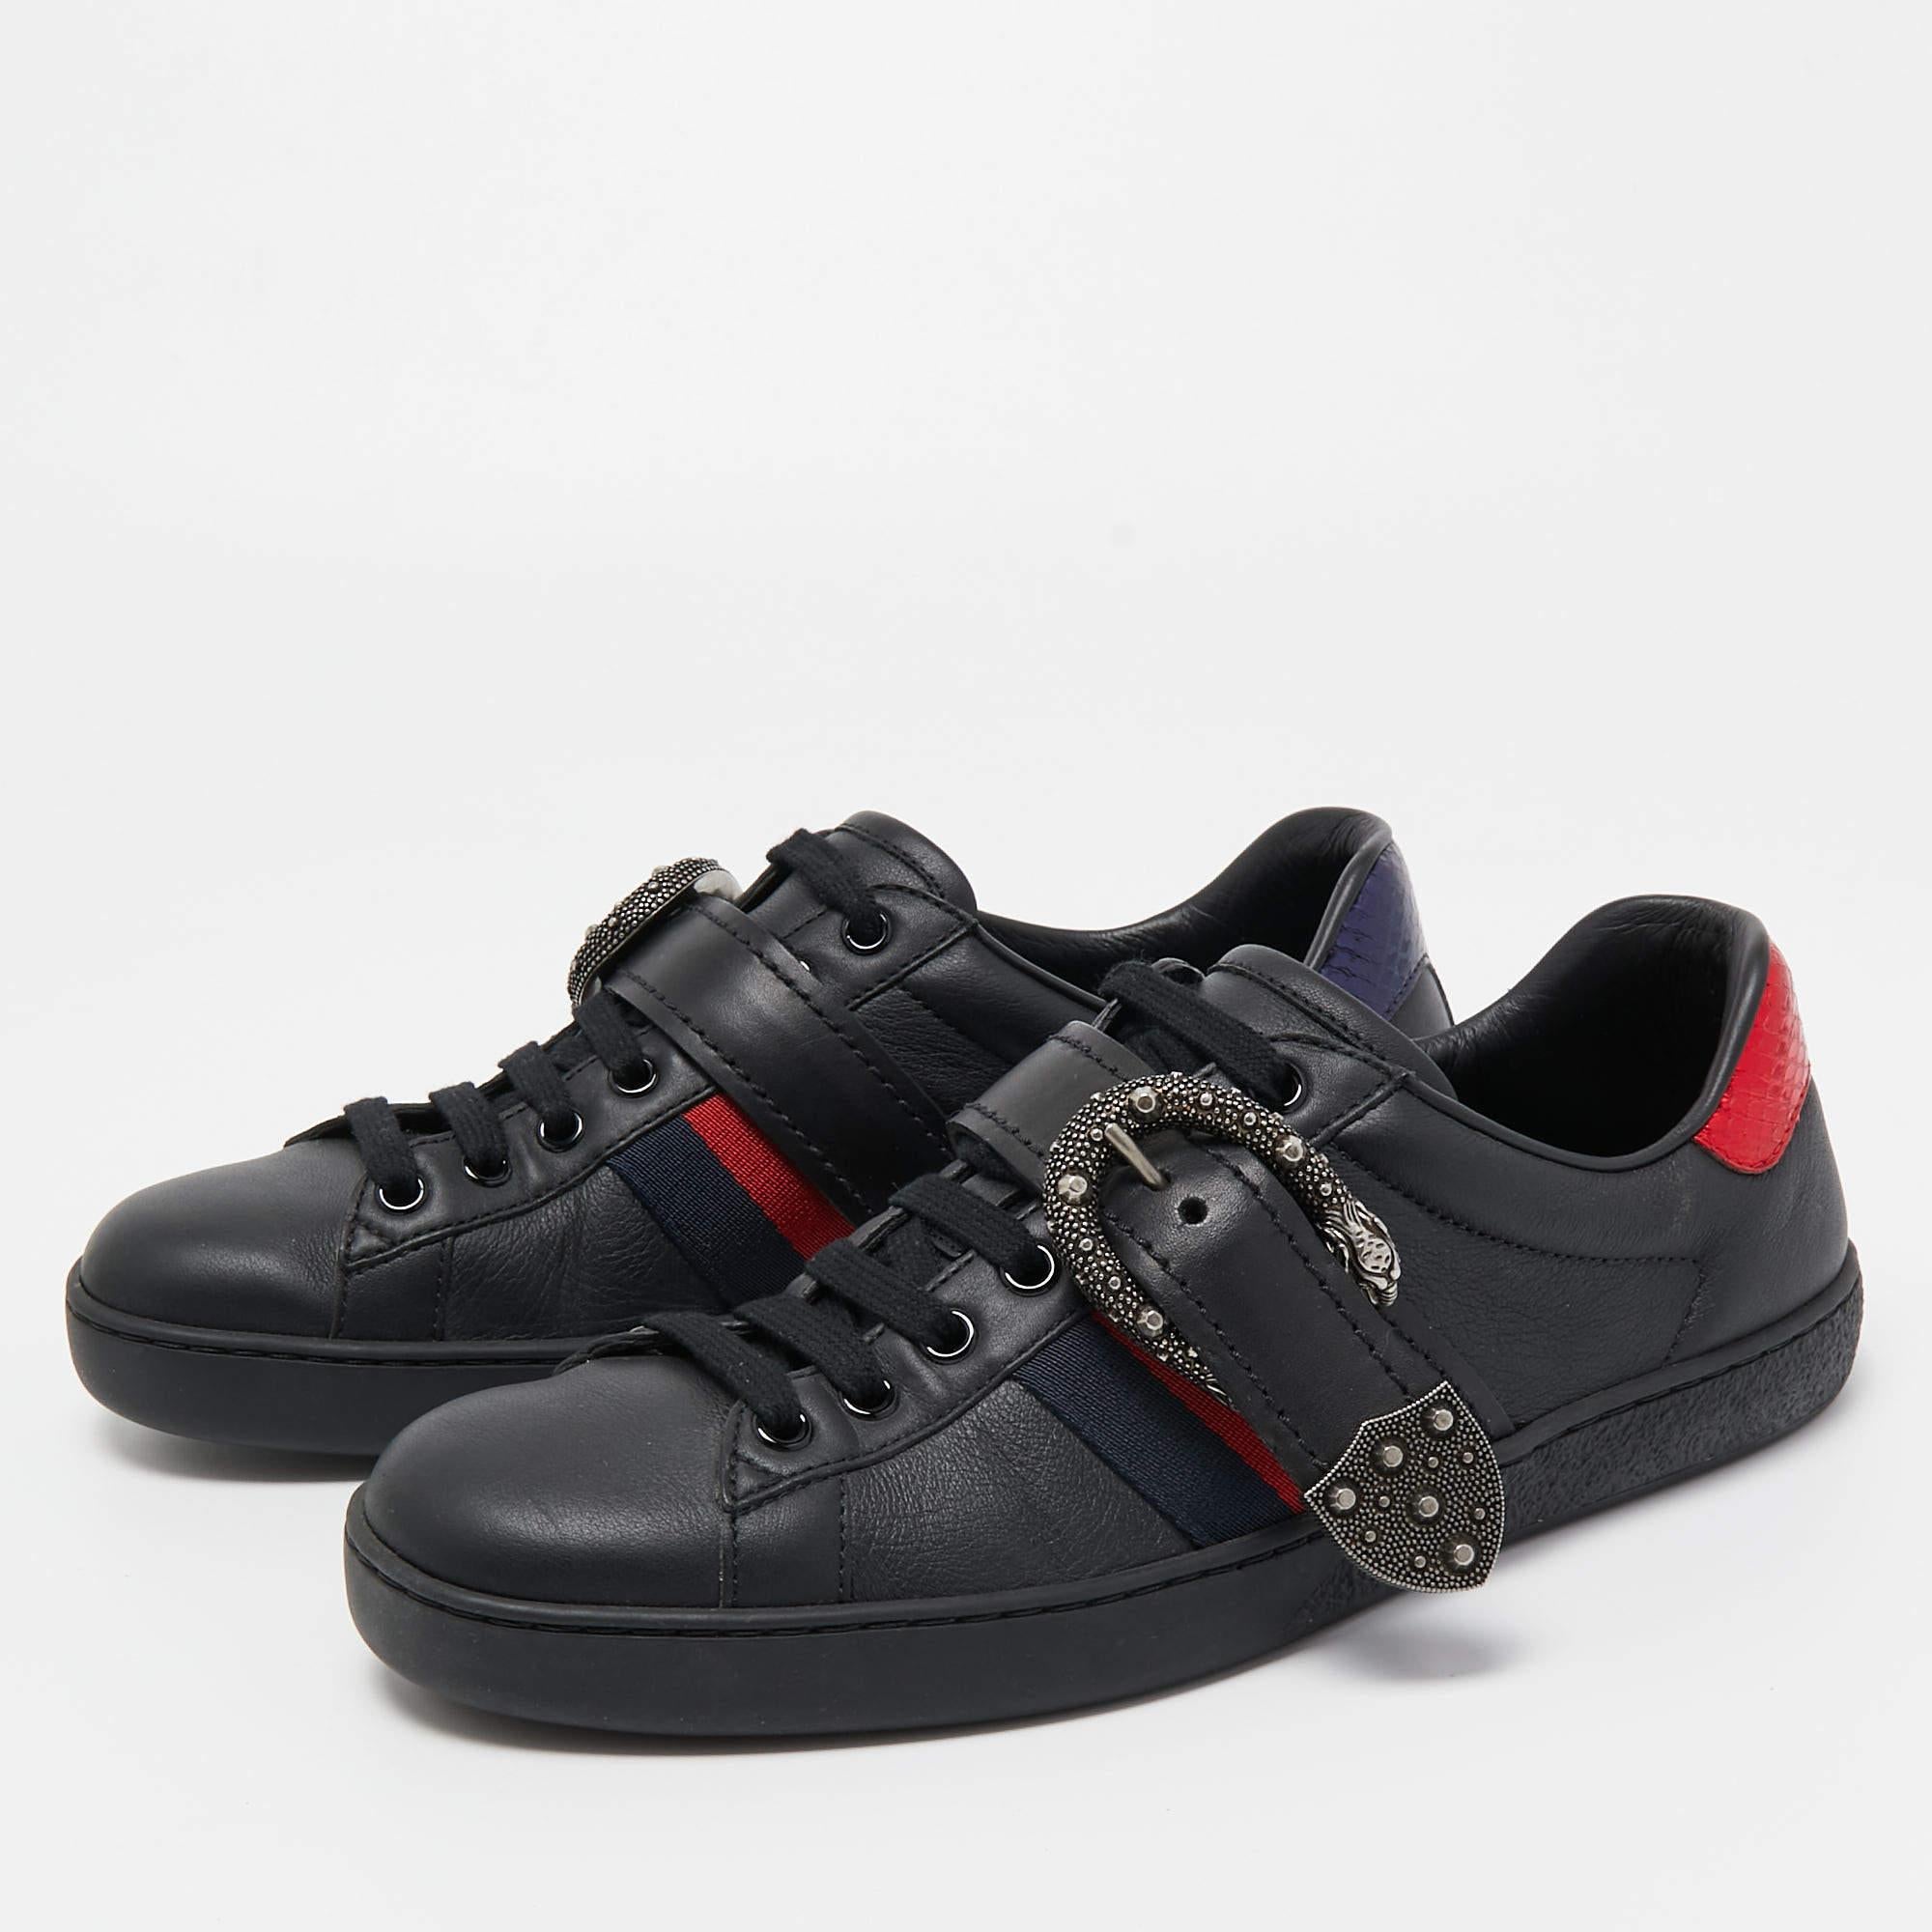 Men's Gucci Black Leather And Python Trim Ace Dionysus Buckle Lace Up Sneakers Size 40